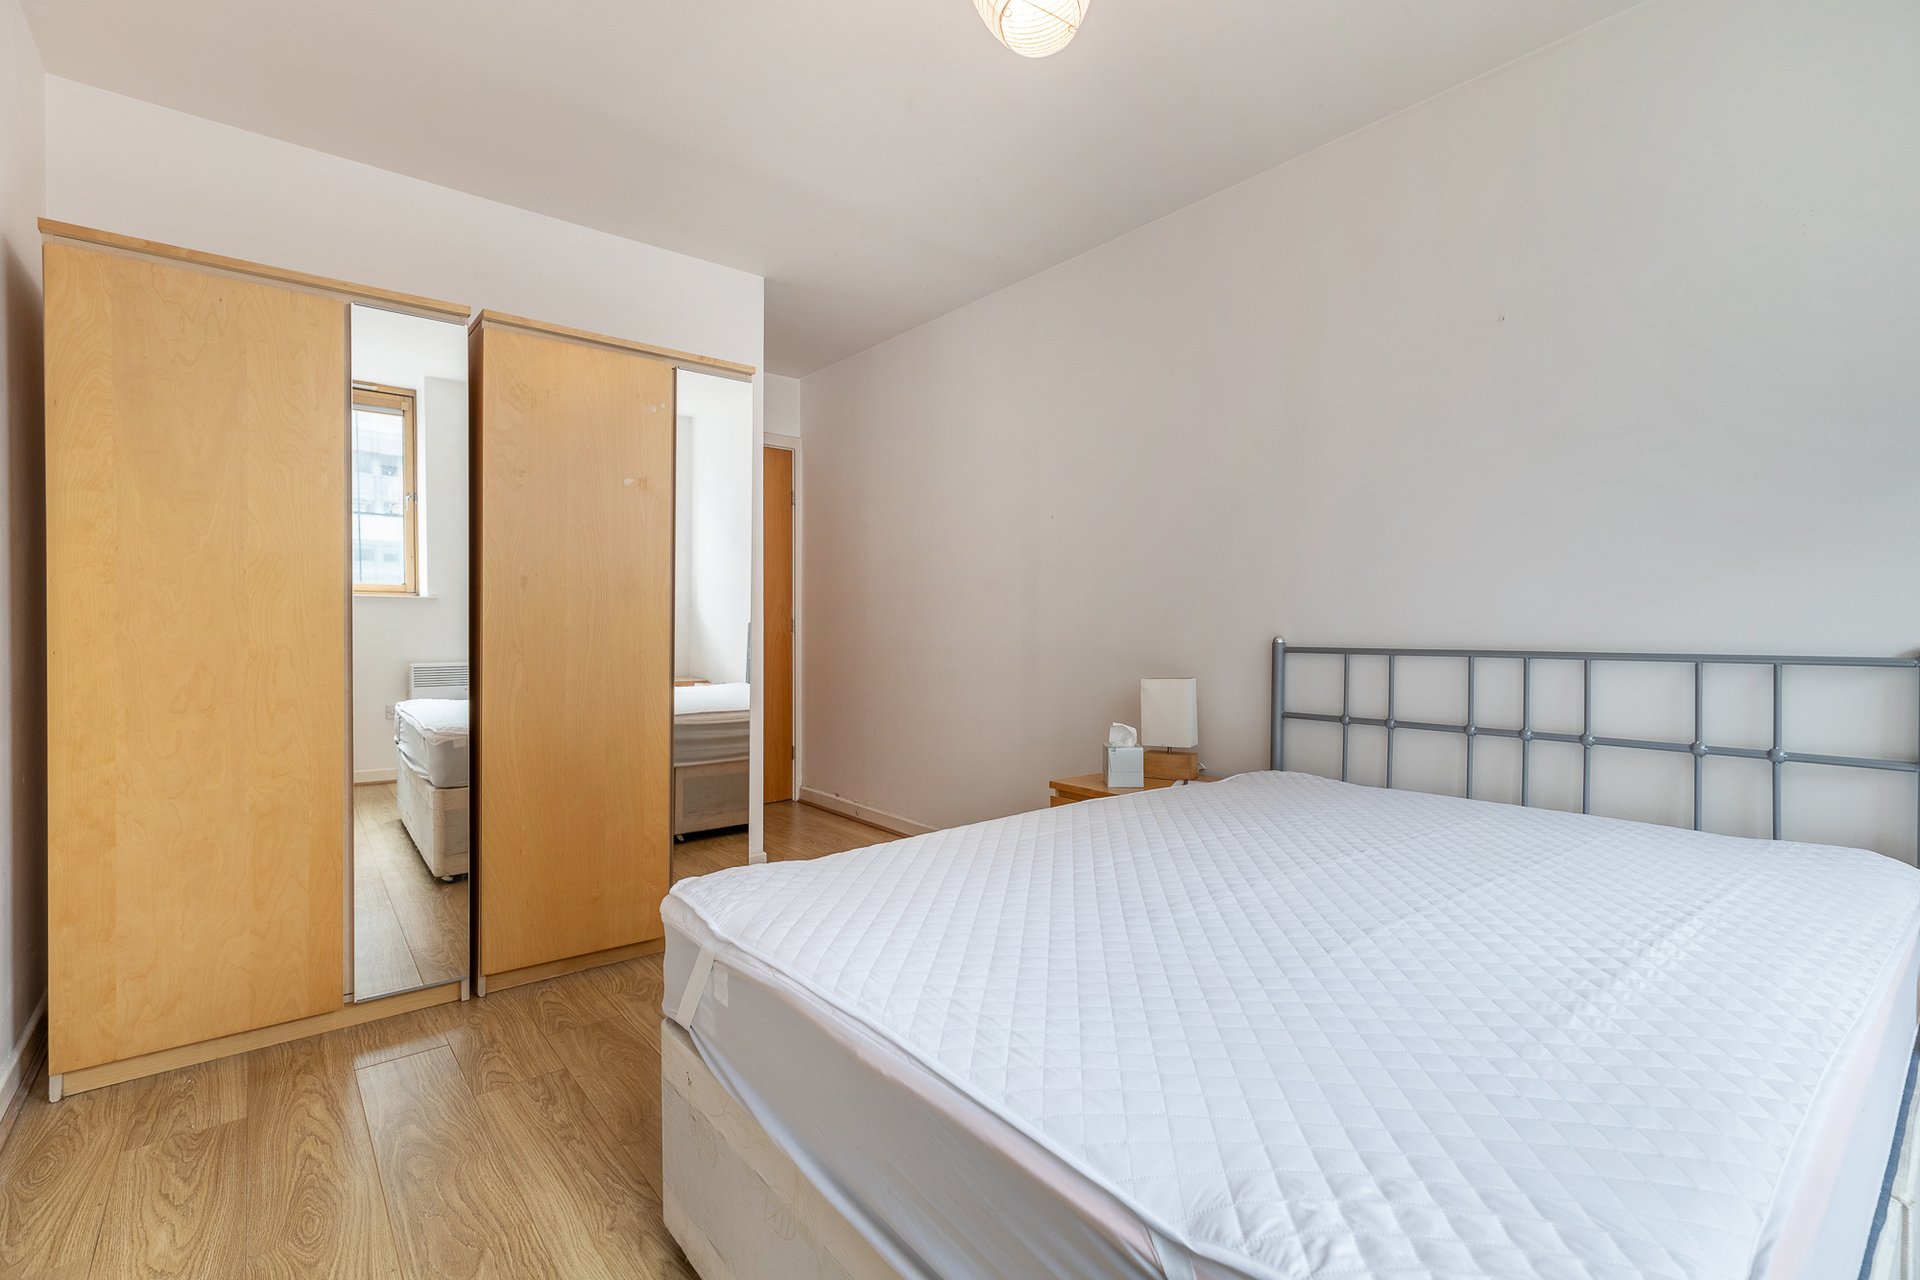 Flat 5/2 The Pinnacle, 160 Bothwell Street, City Centre, Glasgow, G2 7EA - Picture #13